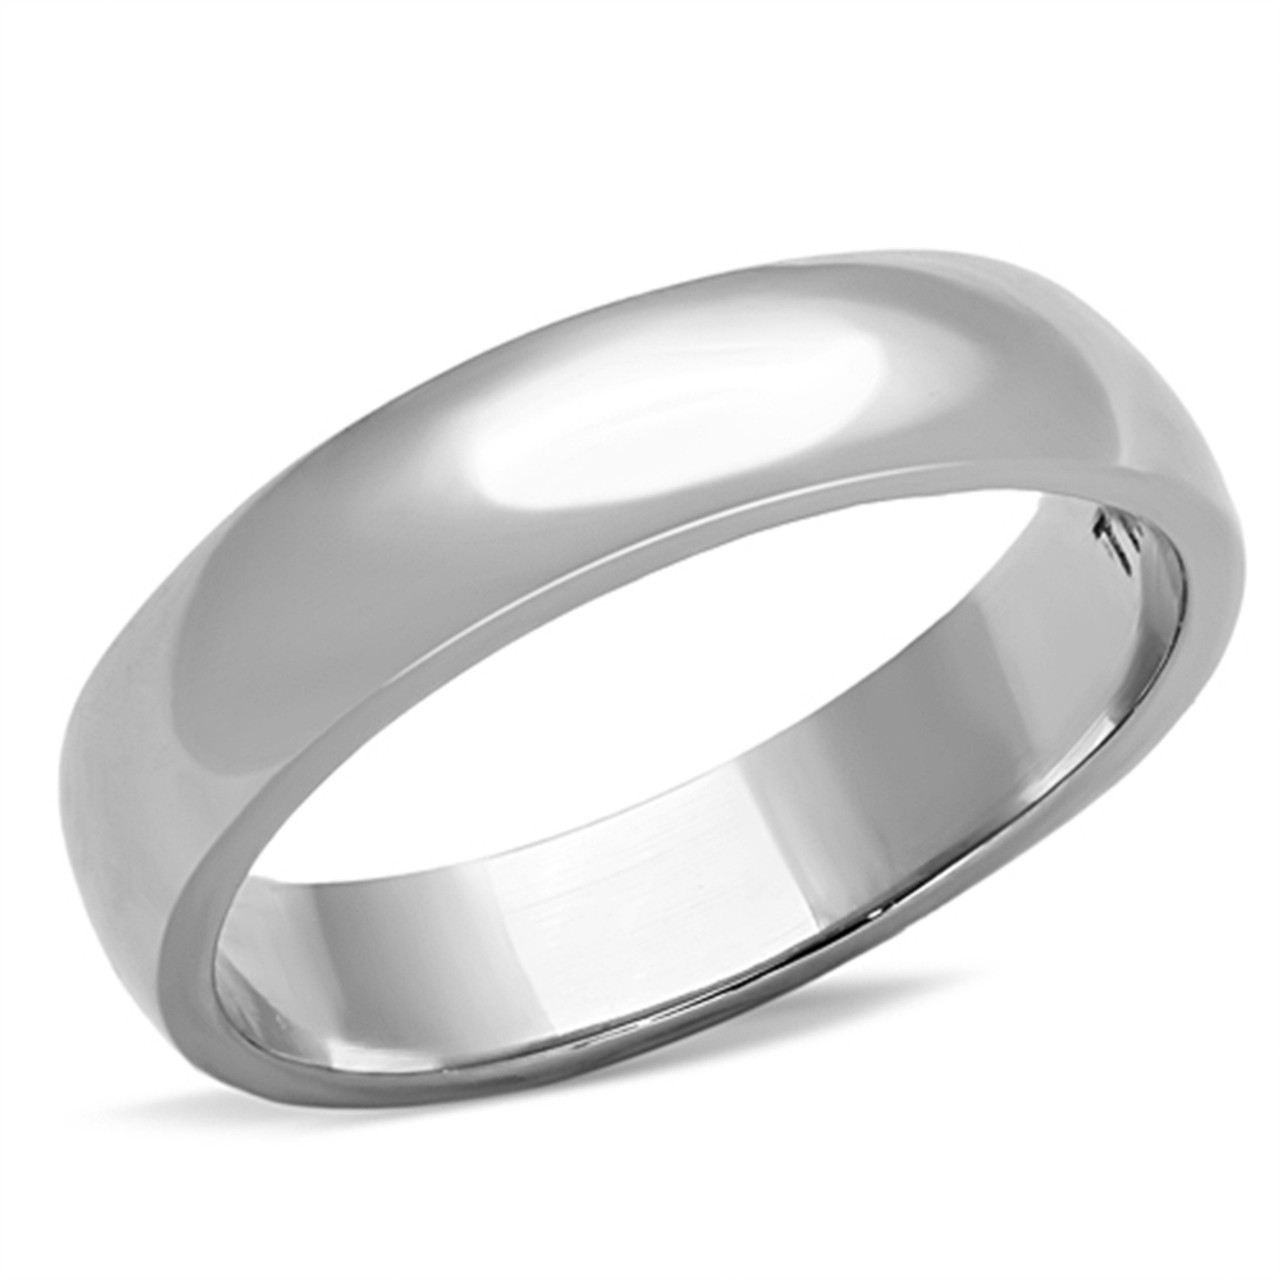 AR001 Stainless Steel 316L High Polished Wedding Band Ring 3mm-8mm Wide  Sizes 4.5-14 